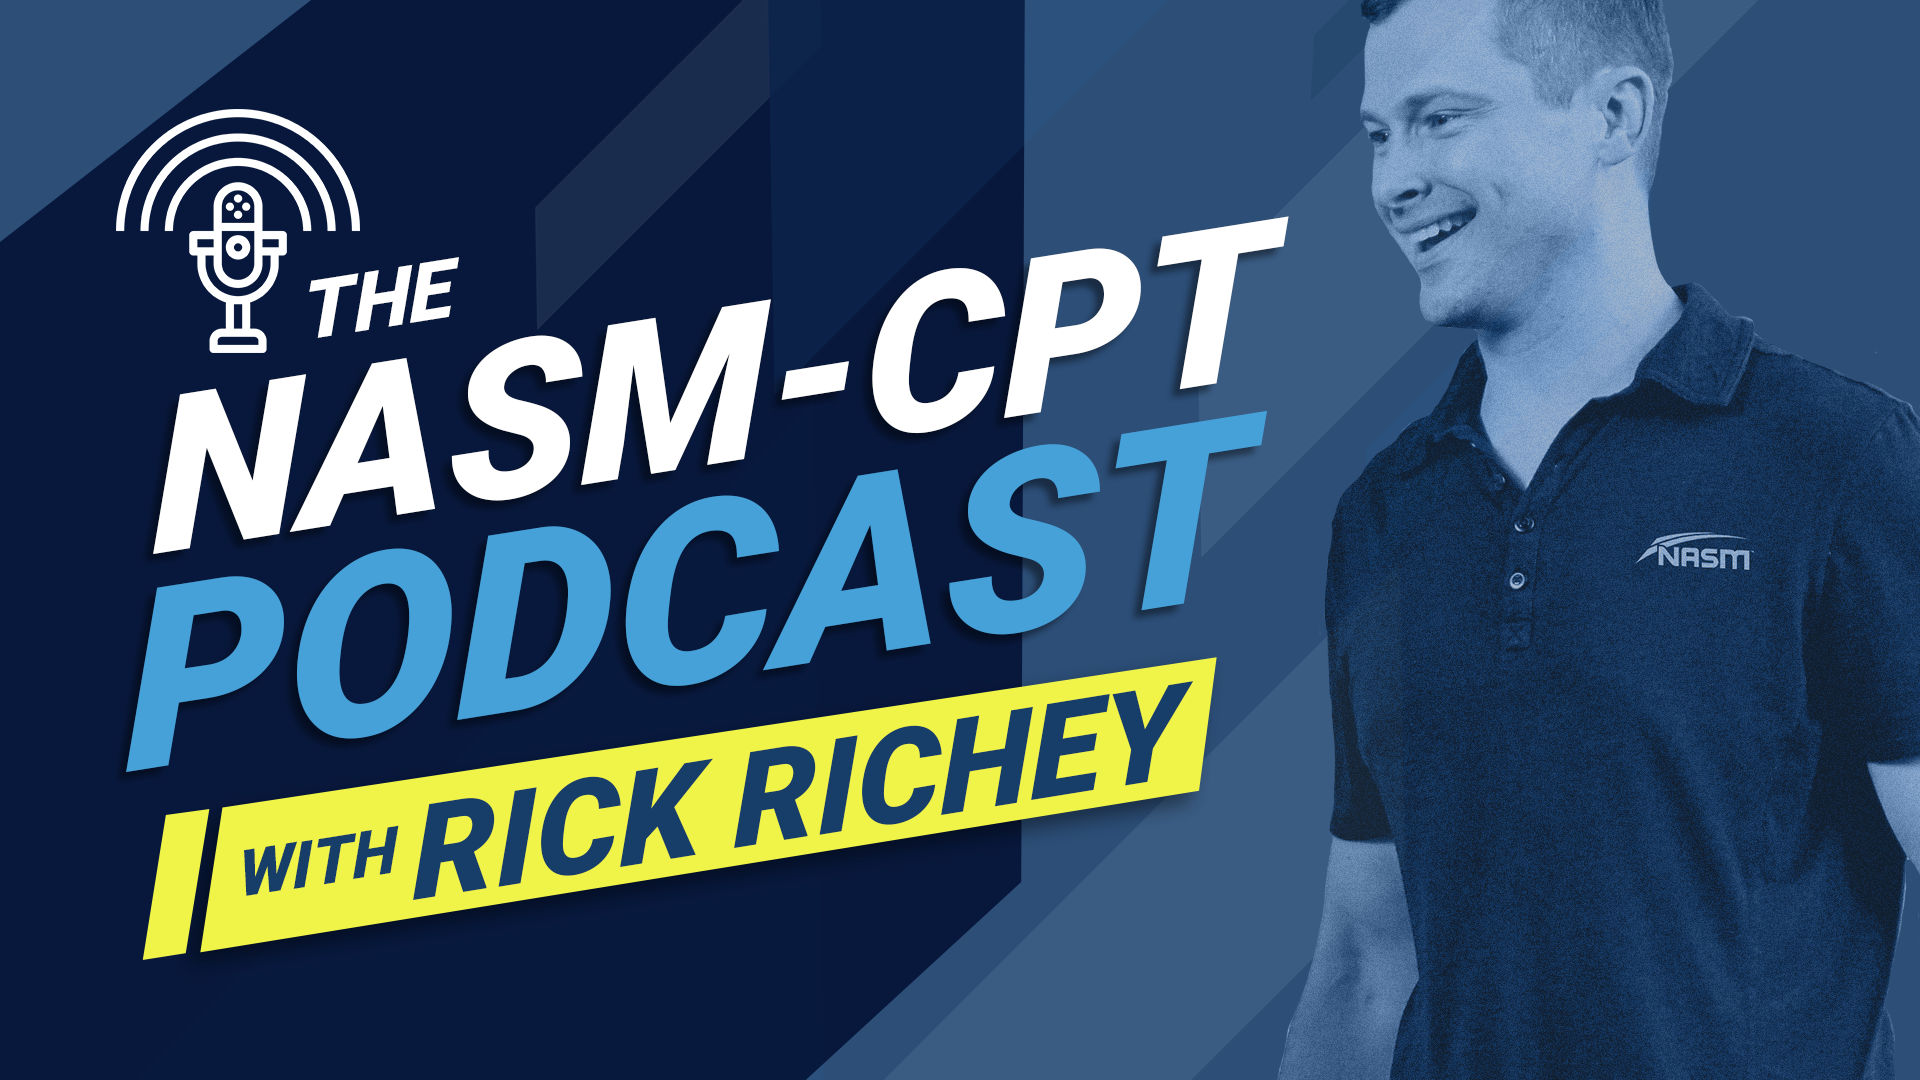 Rick Richey's NASM-CPT podcast ad